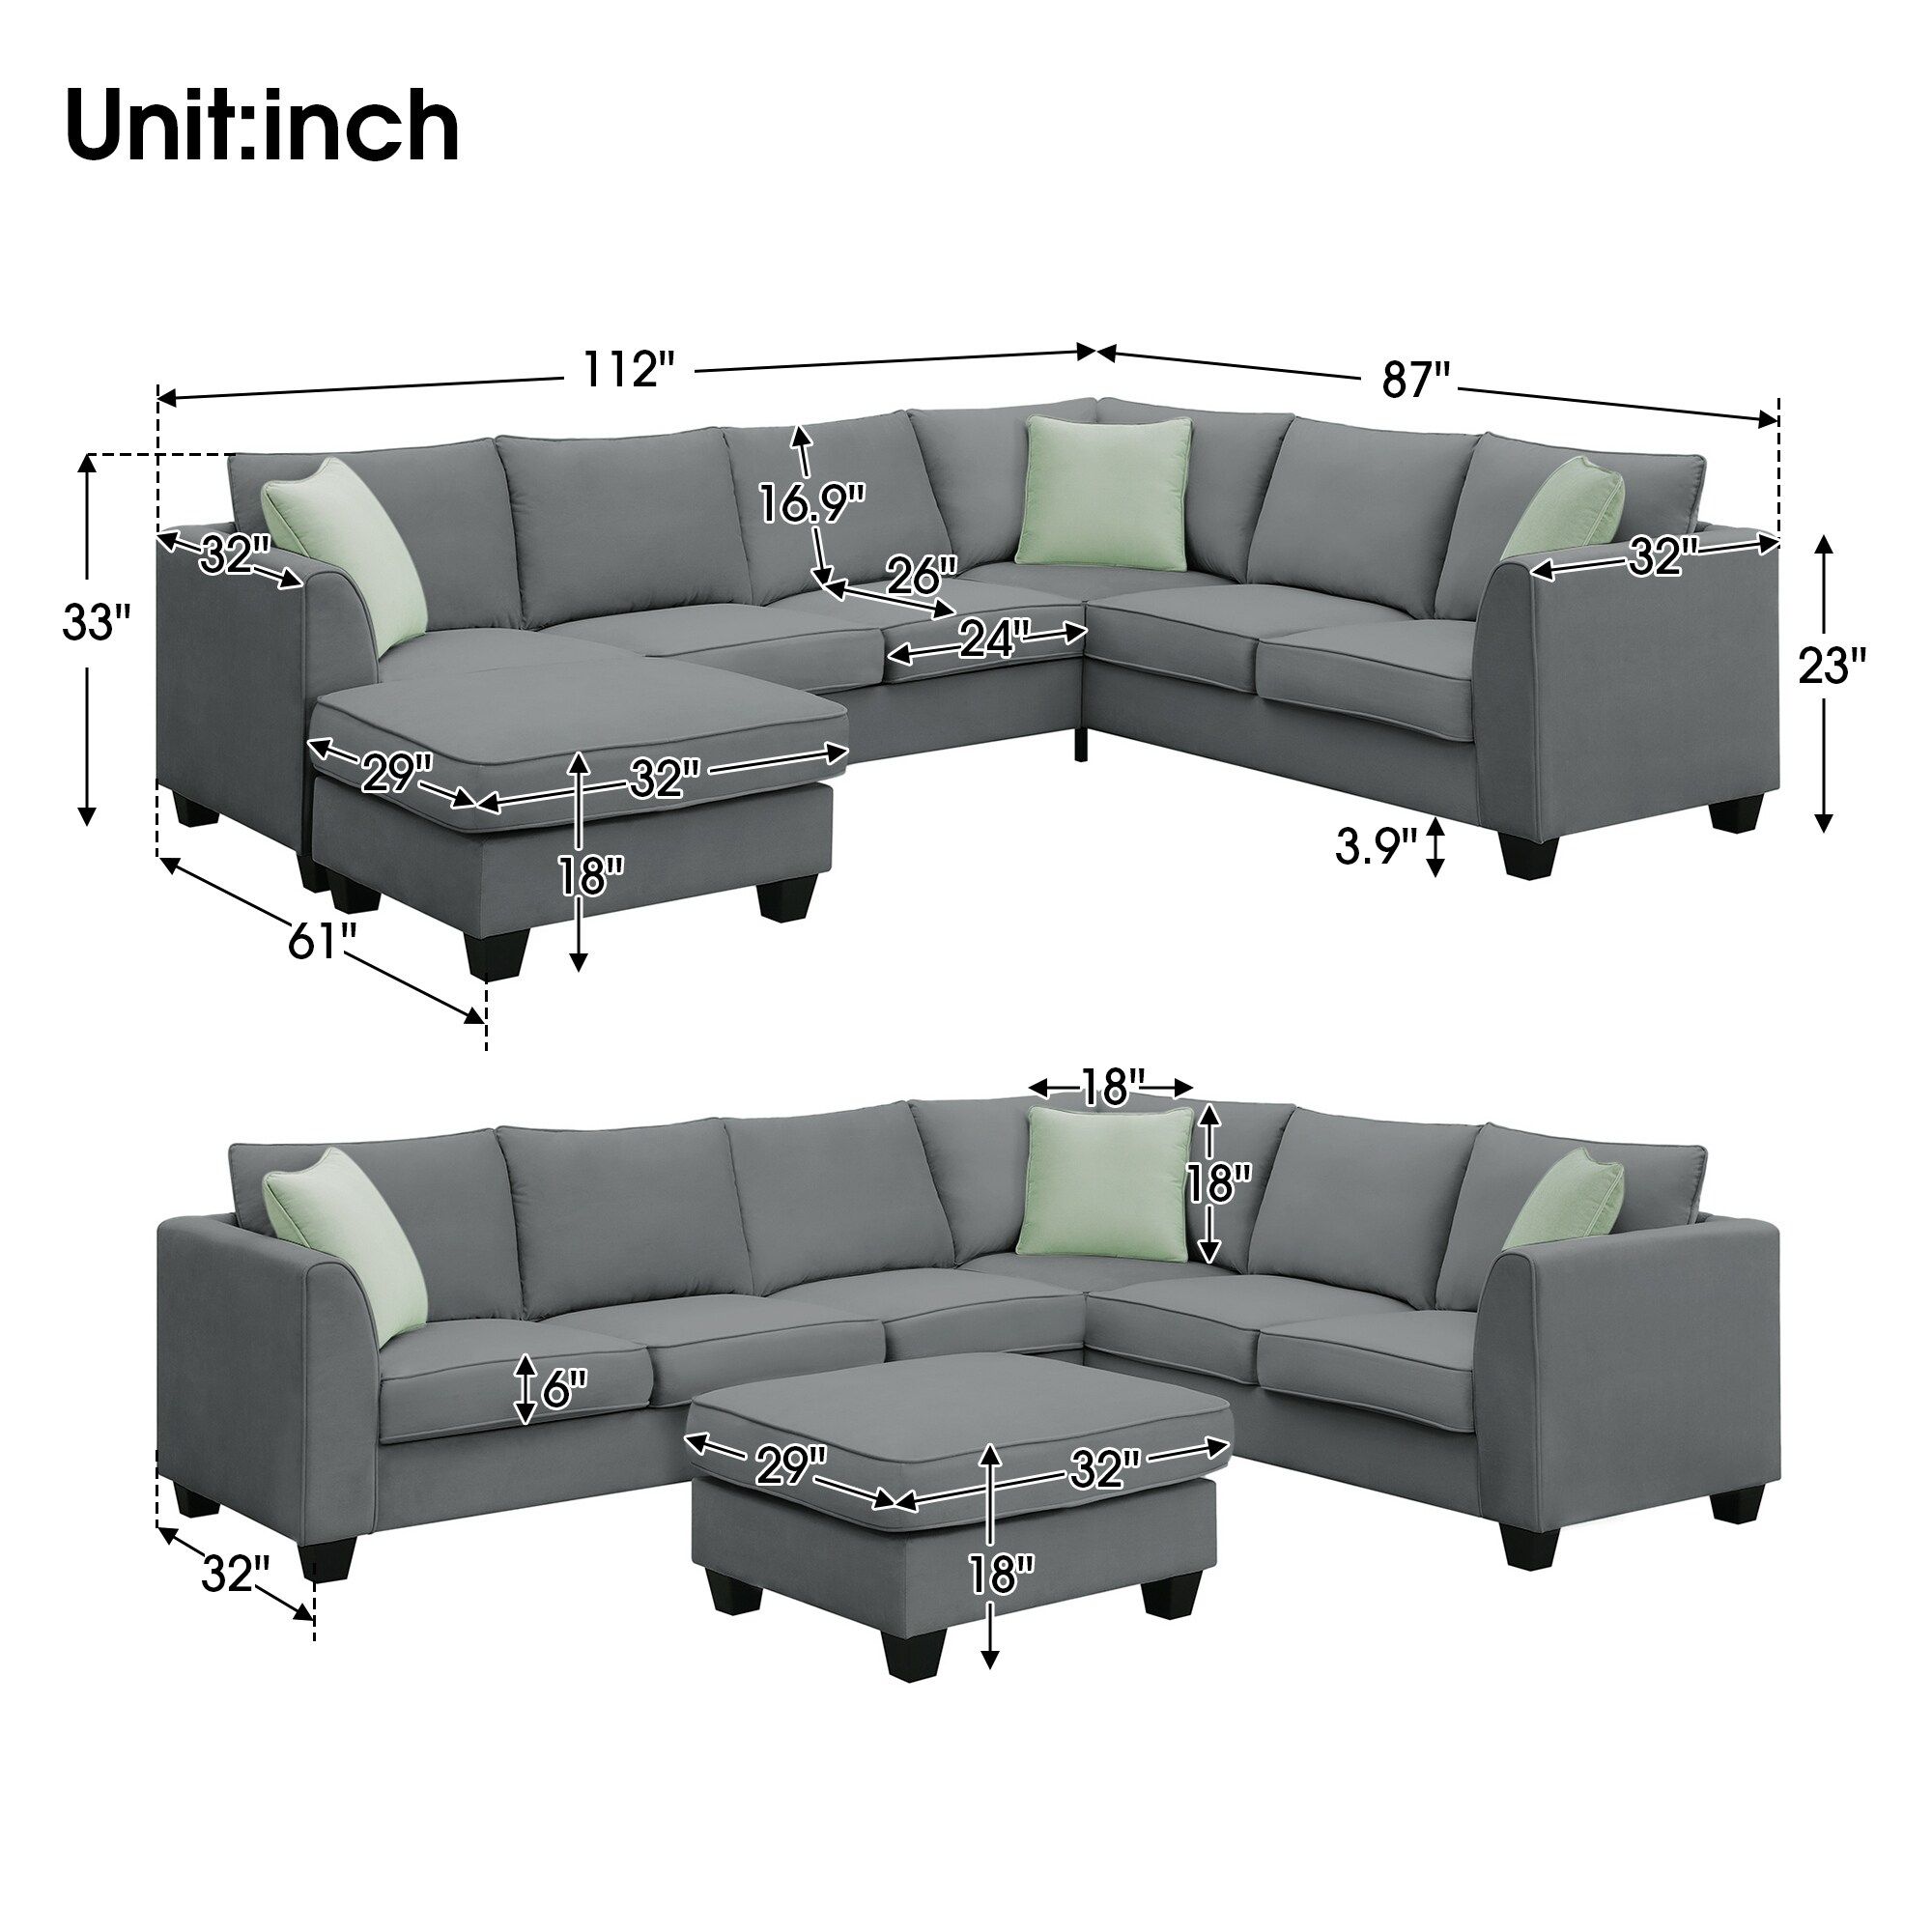 7 Seats Modular Sectional Sofa With Ottoman, Living Room Couches Sets, L  Shaped Fabric Sofa Corner Couch Set With 3 Pillows – Bed Bath & Beyond –  38260314 For 3 Seat L Shaped Sofas In Black (View 12 of 15)